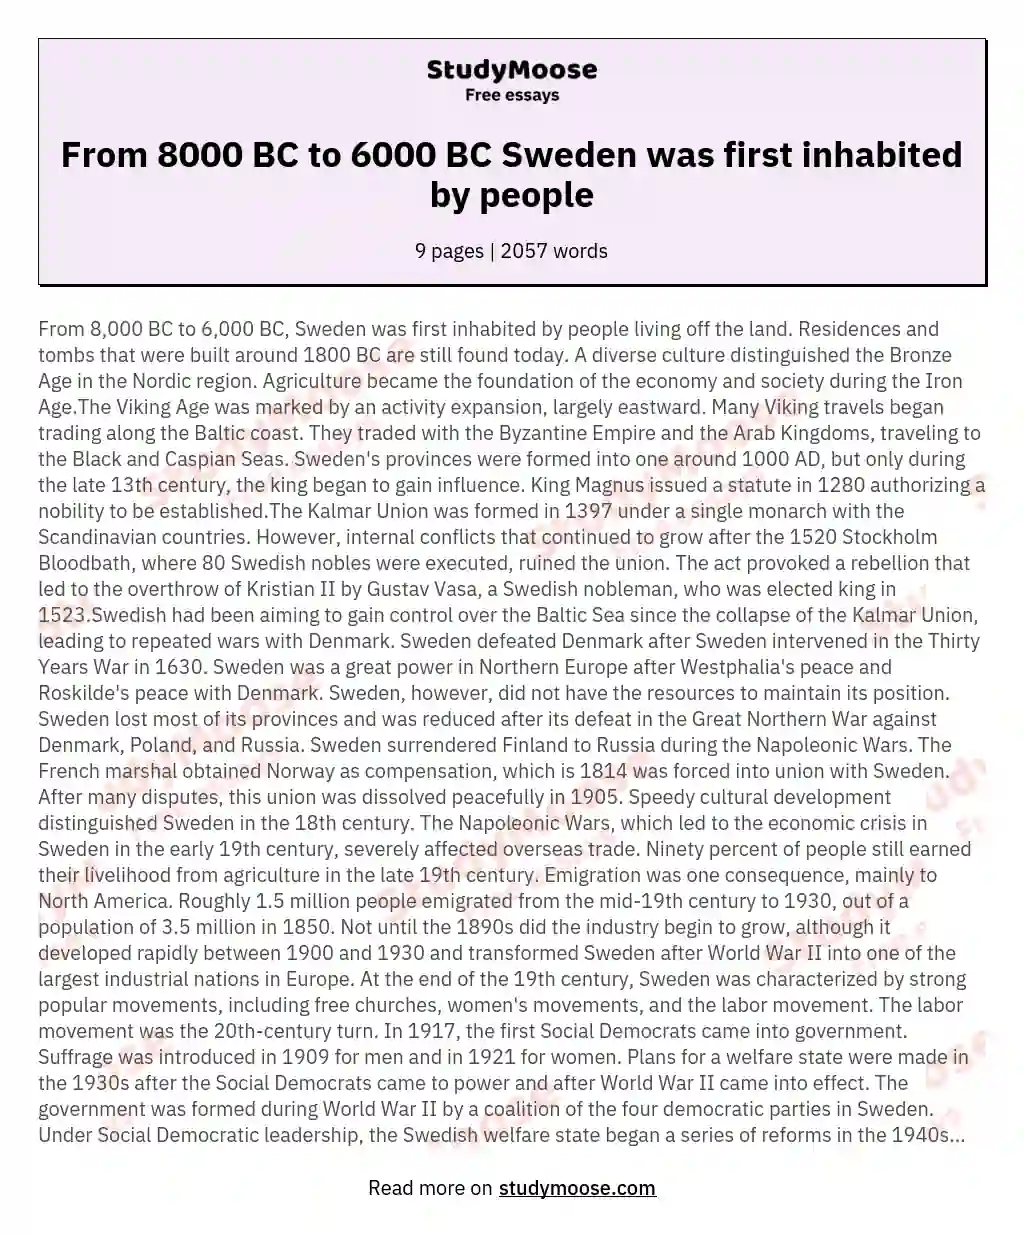 From 8000 BC to 6000 BC Sweden was first inhabited by people essay